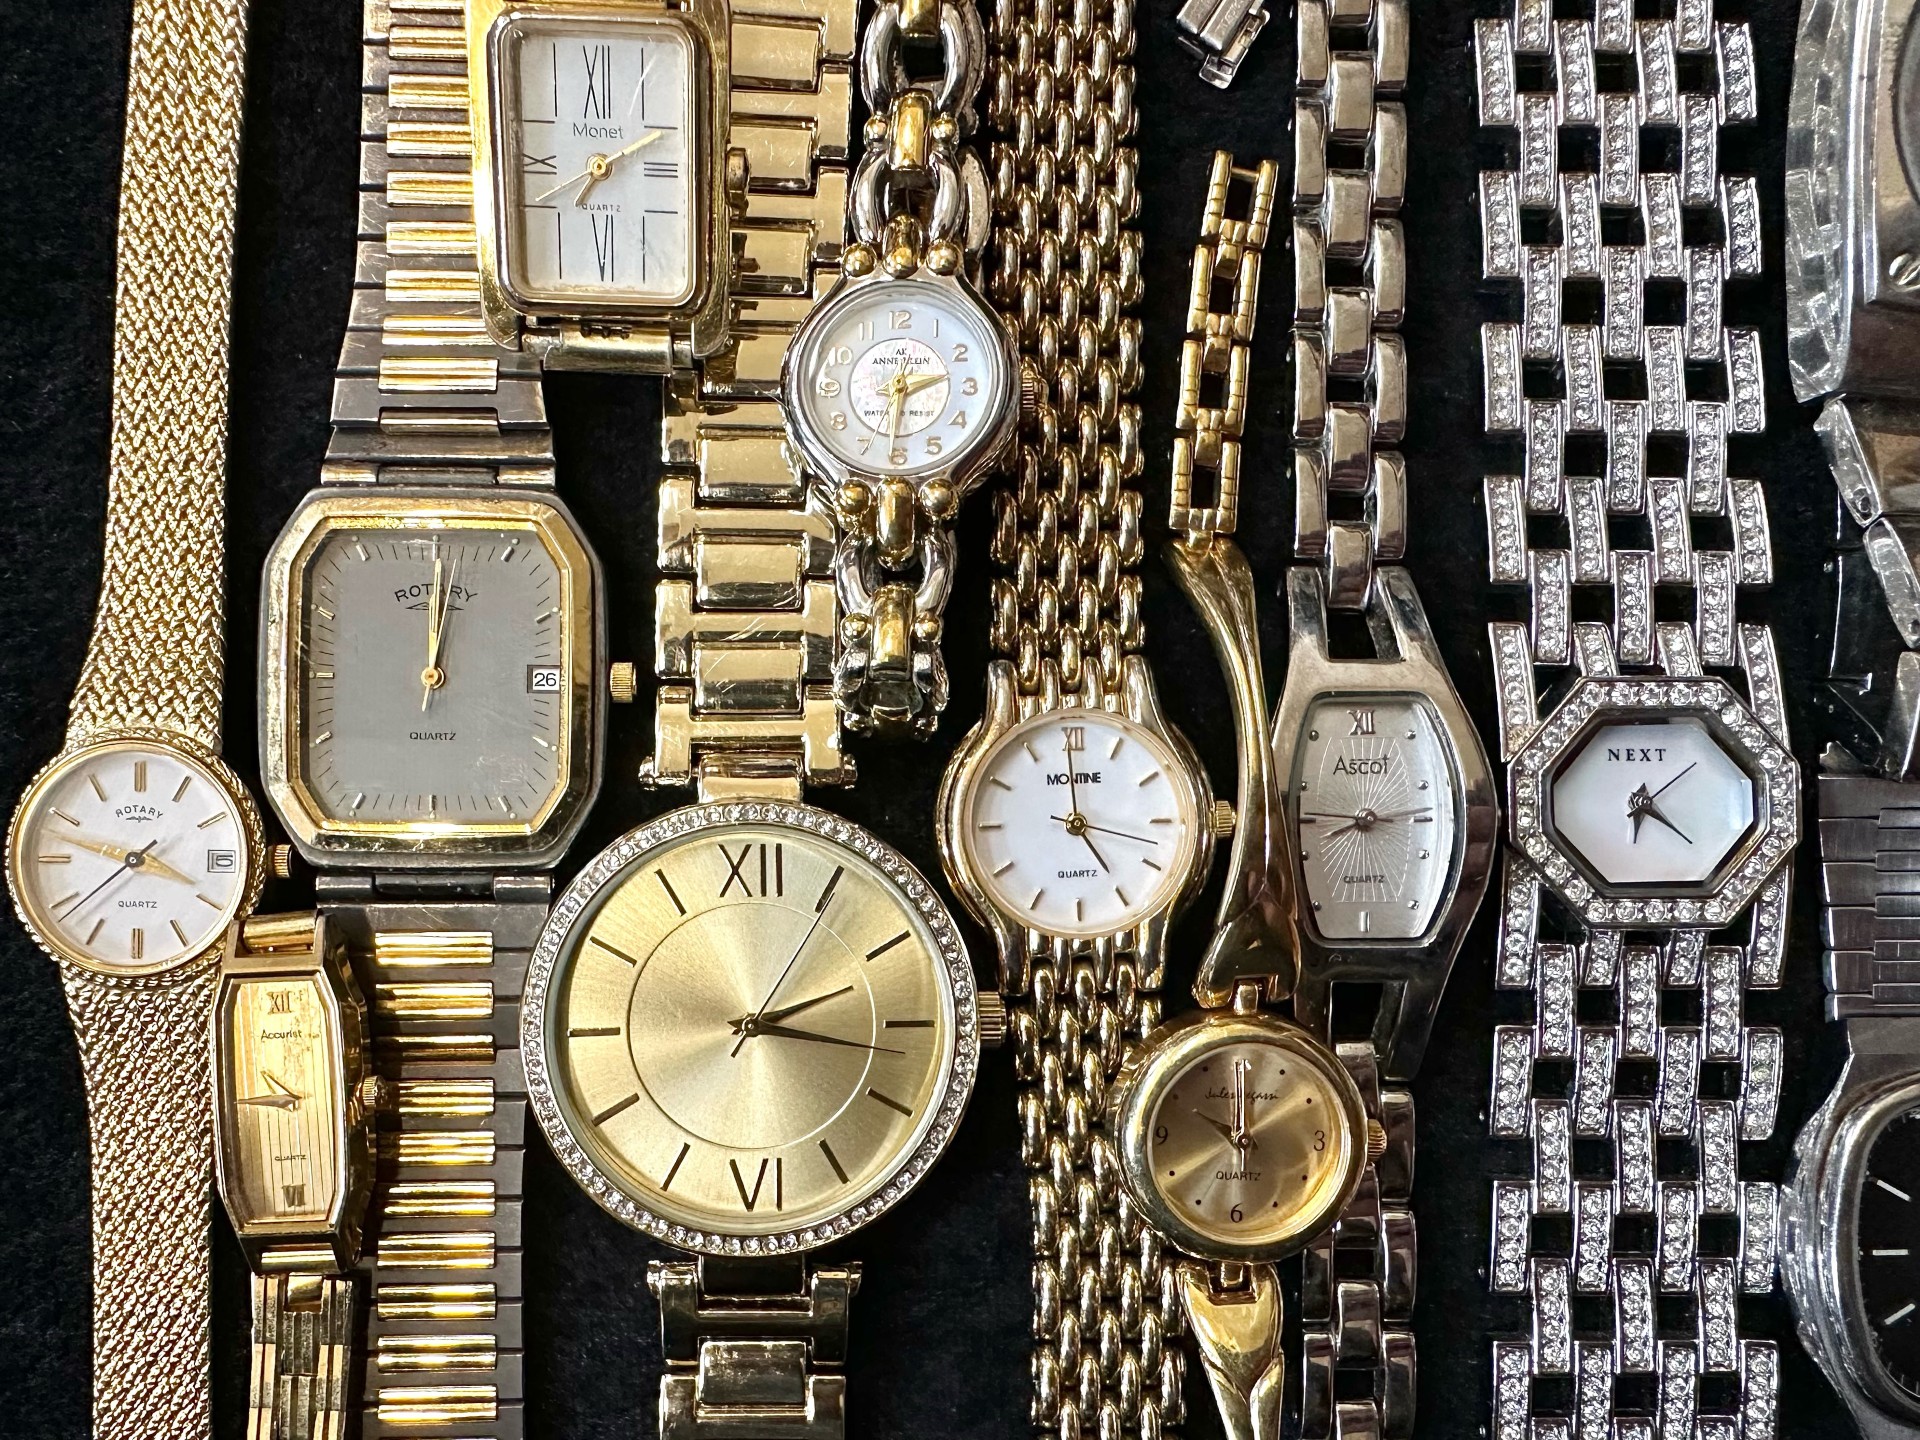 Large Collection of Wrist Watches. gents and ladies watches, lots of different makes and models. - Image 2 of 4